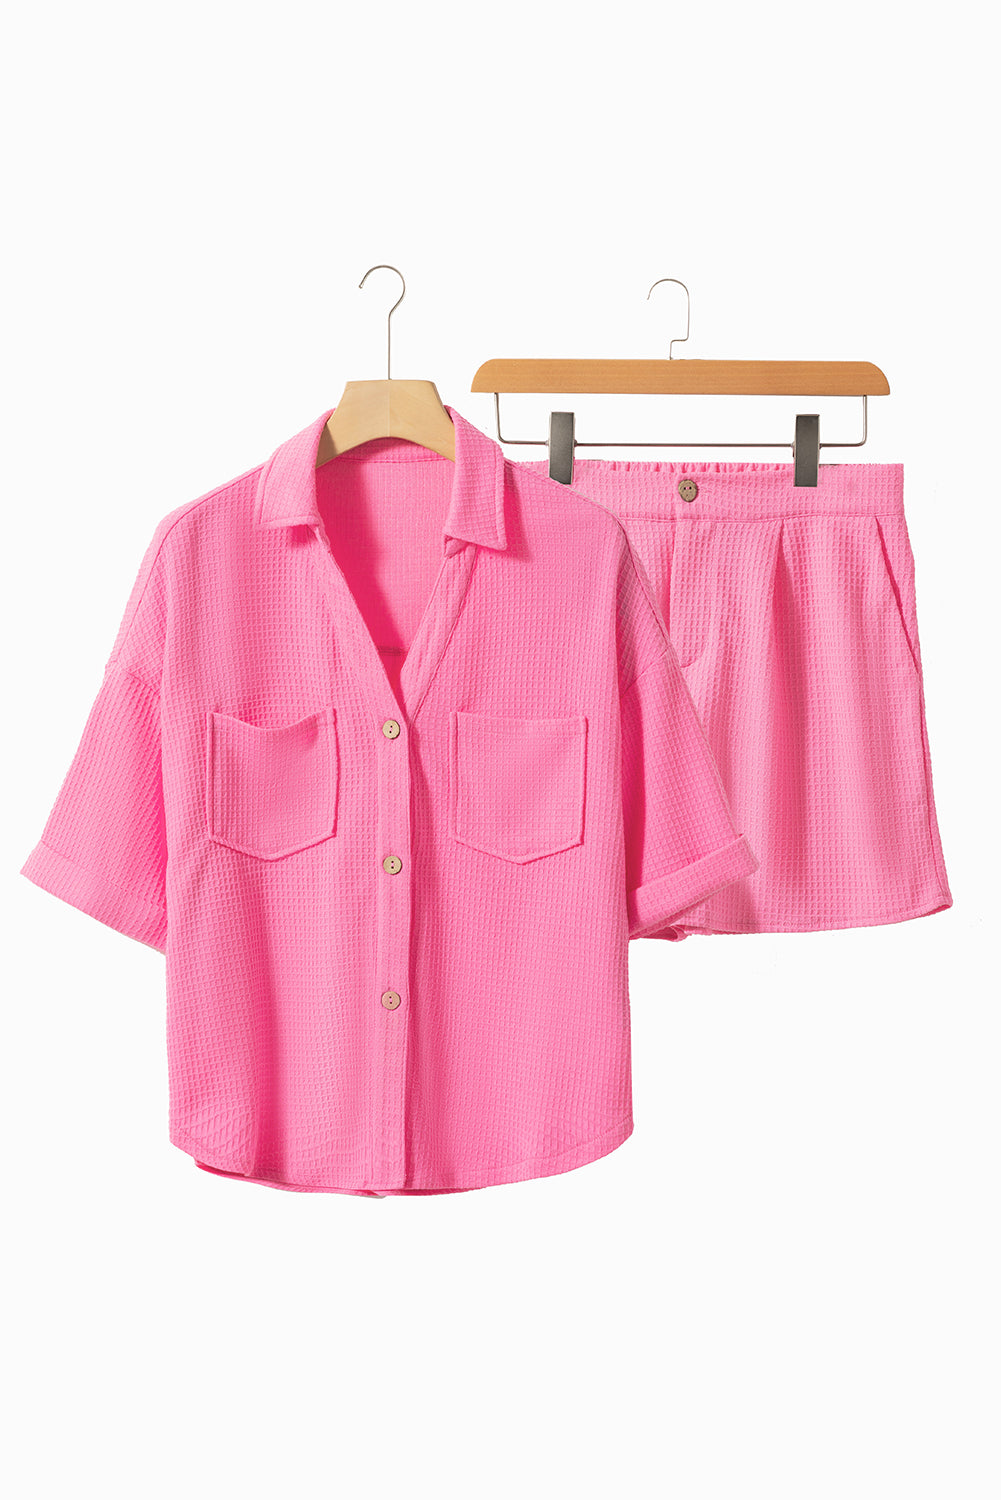 Bright Pink Textured Chest Pocket Half Sleeve Shirt Shorts Outfit